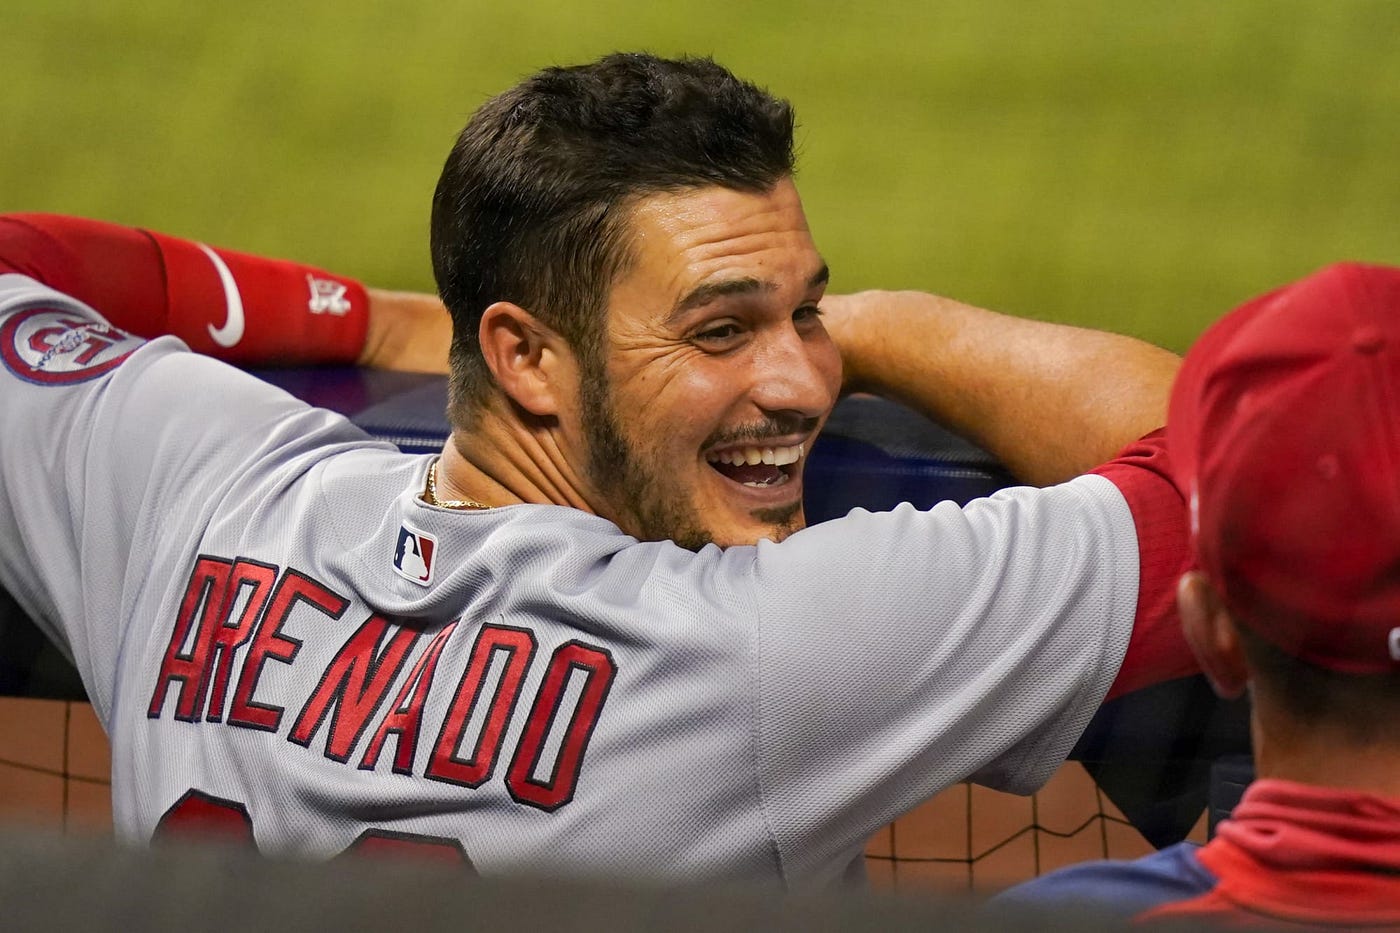 St. Louis Cardinals: Infield Outs Above Average with Nolan Arenado